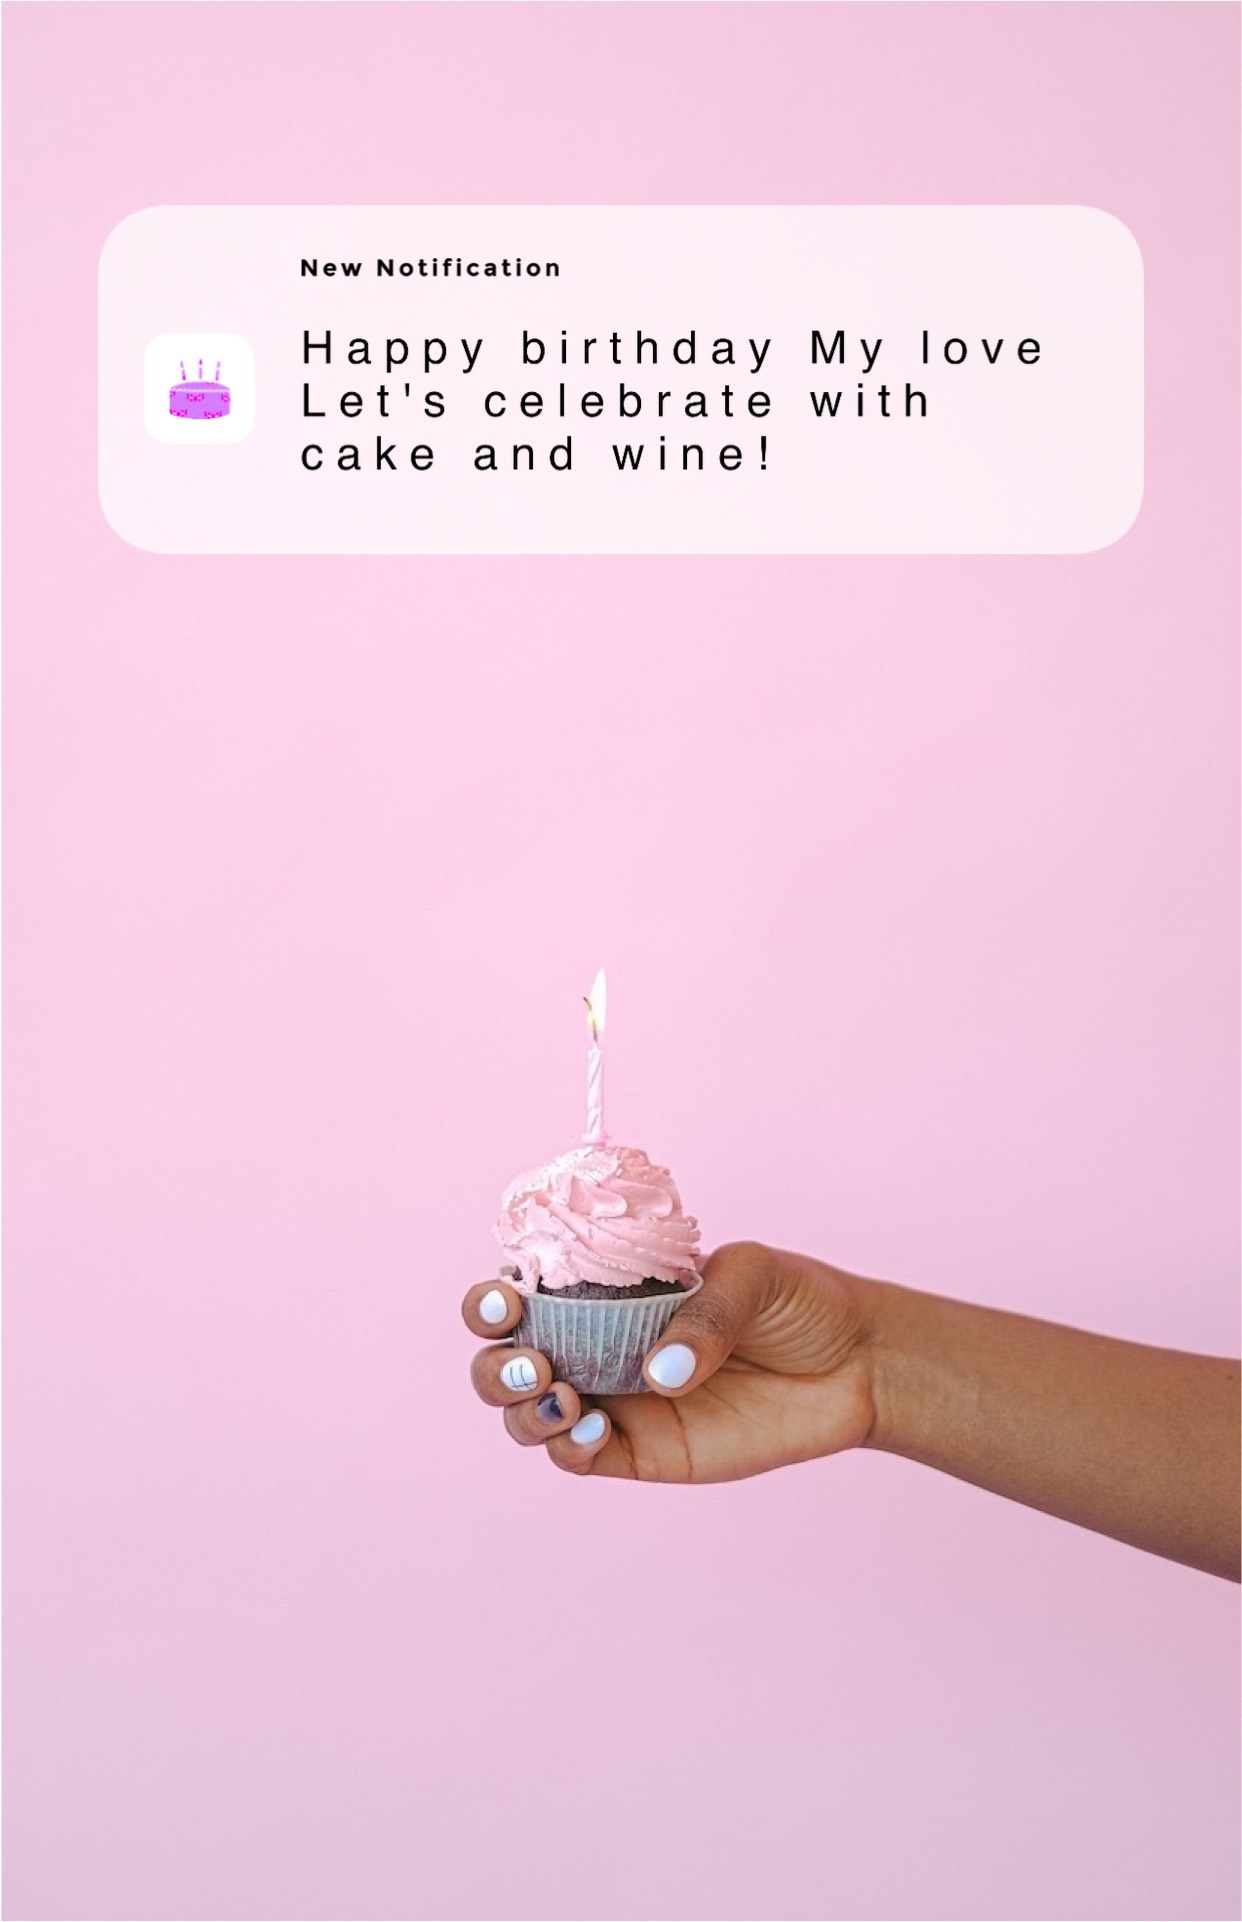 Cupcake and candle happy birthday invitation template